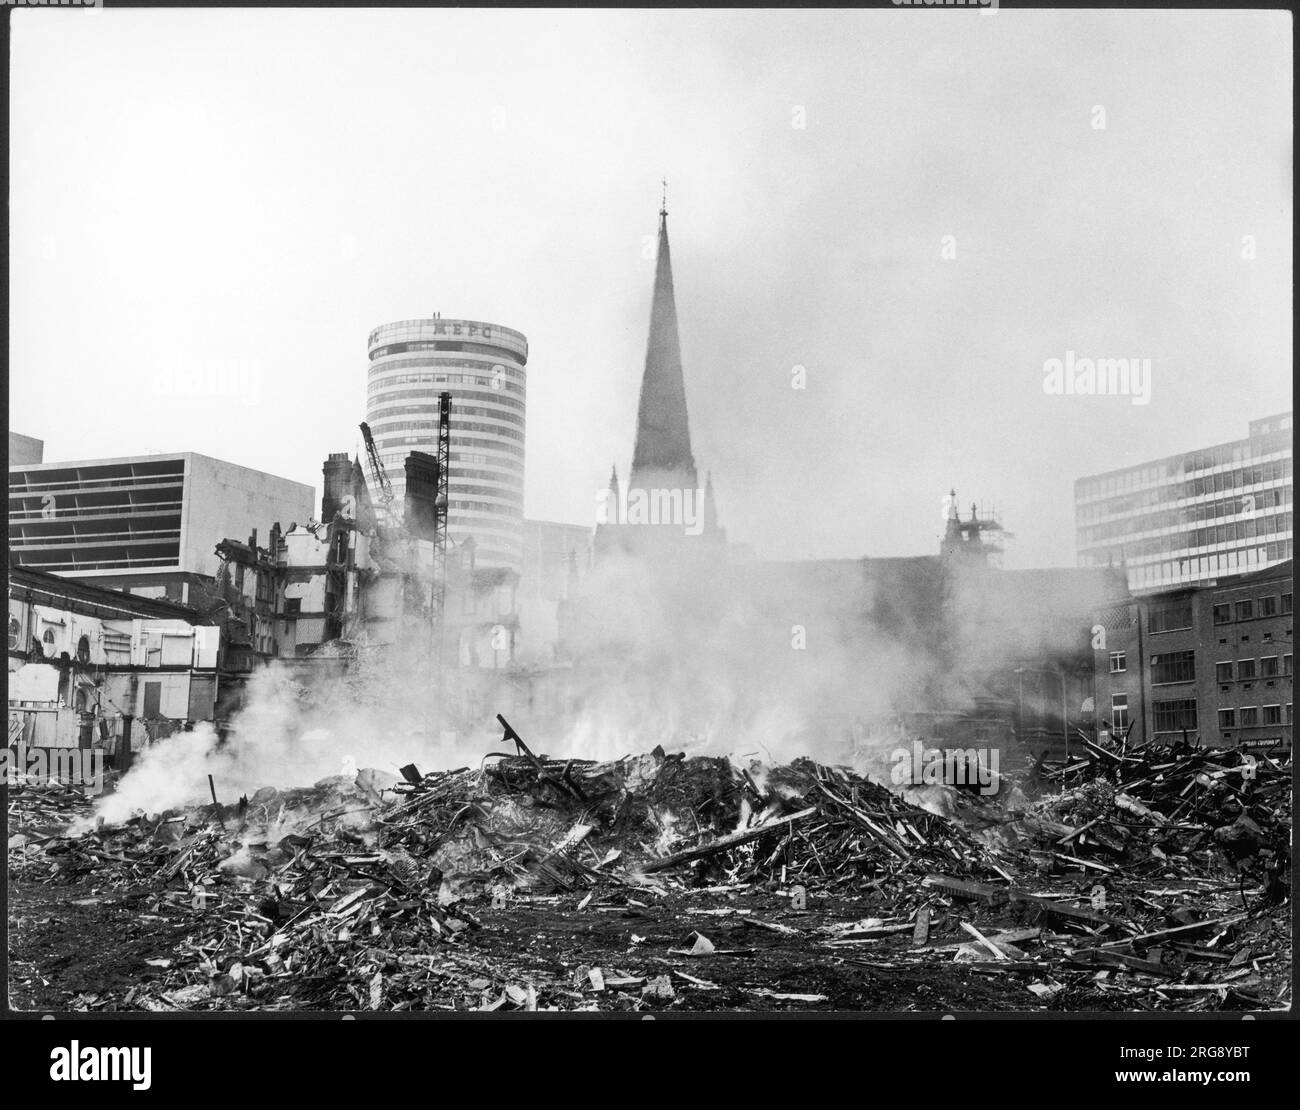 The old makes way for the new in Birmingham, England as buildings are destroyed to clear land. Stock Photo